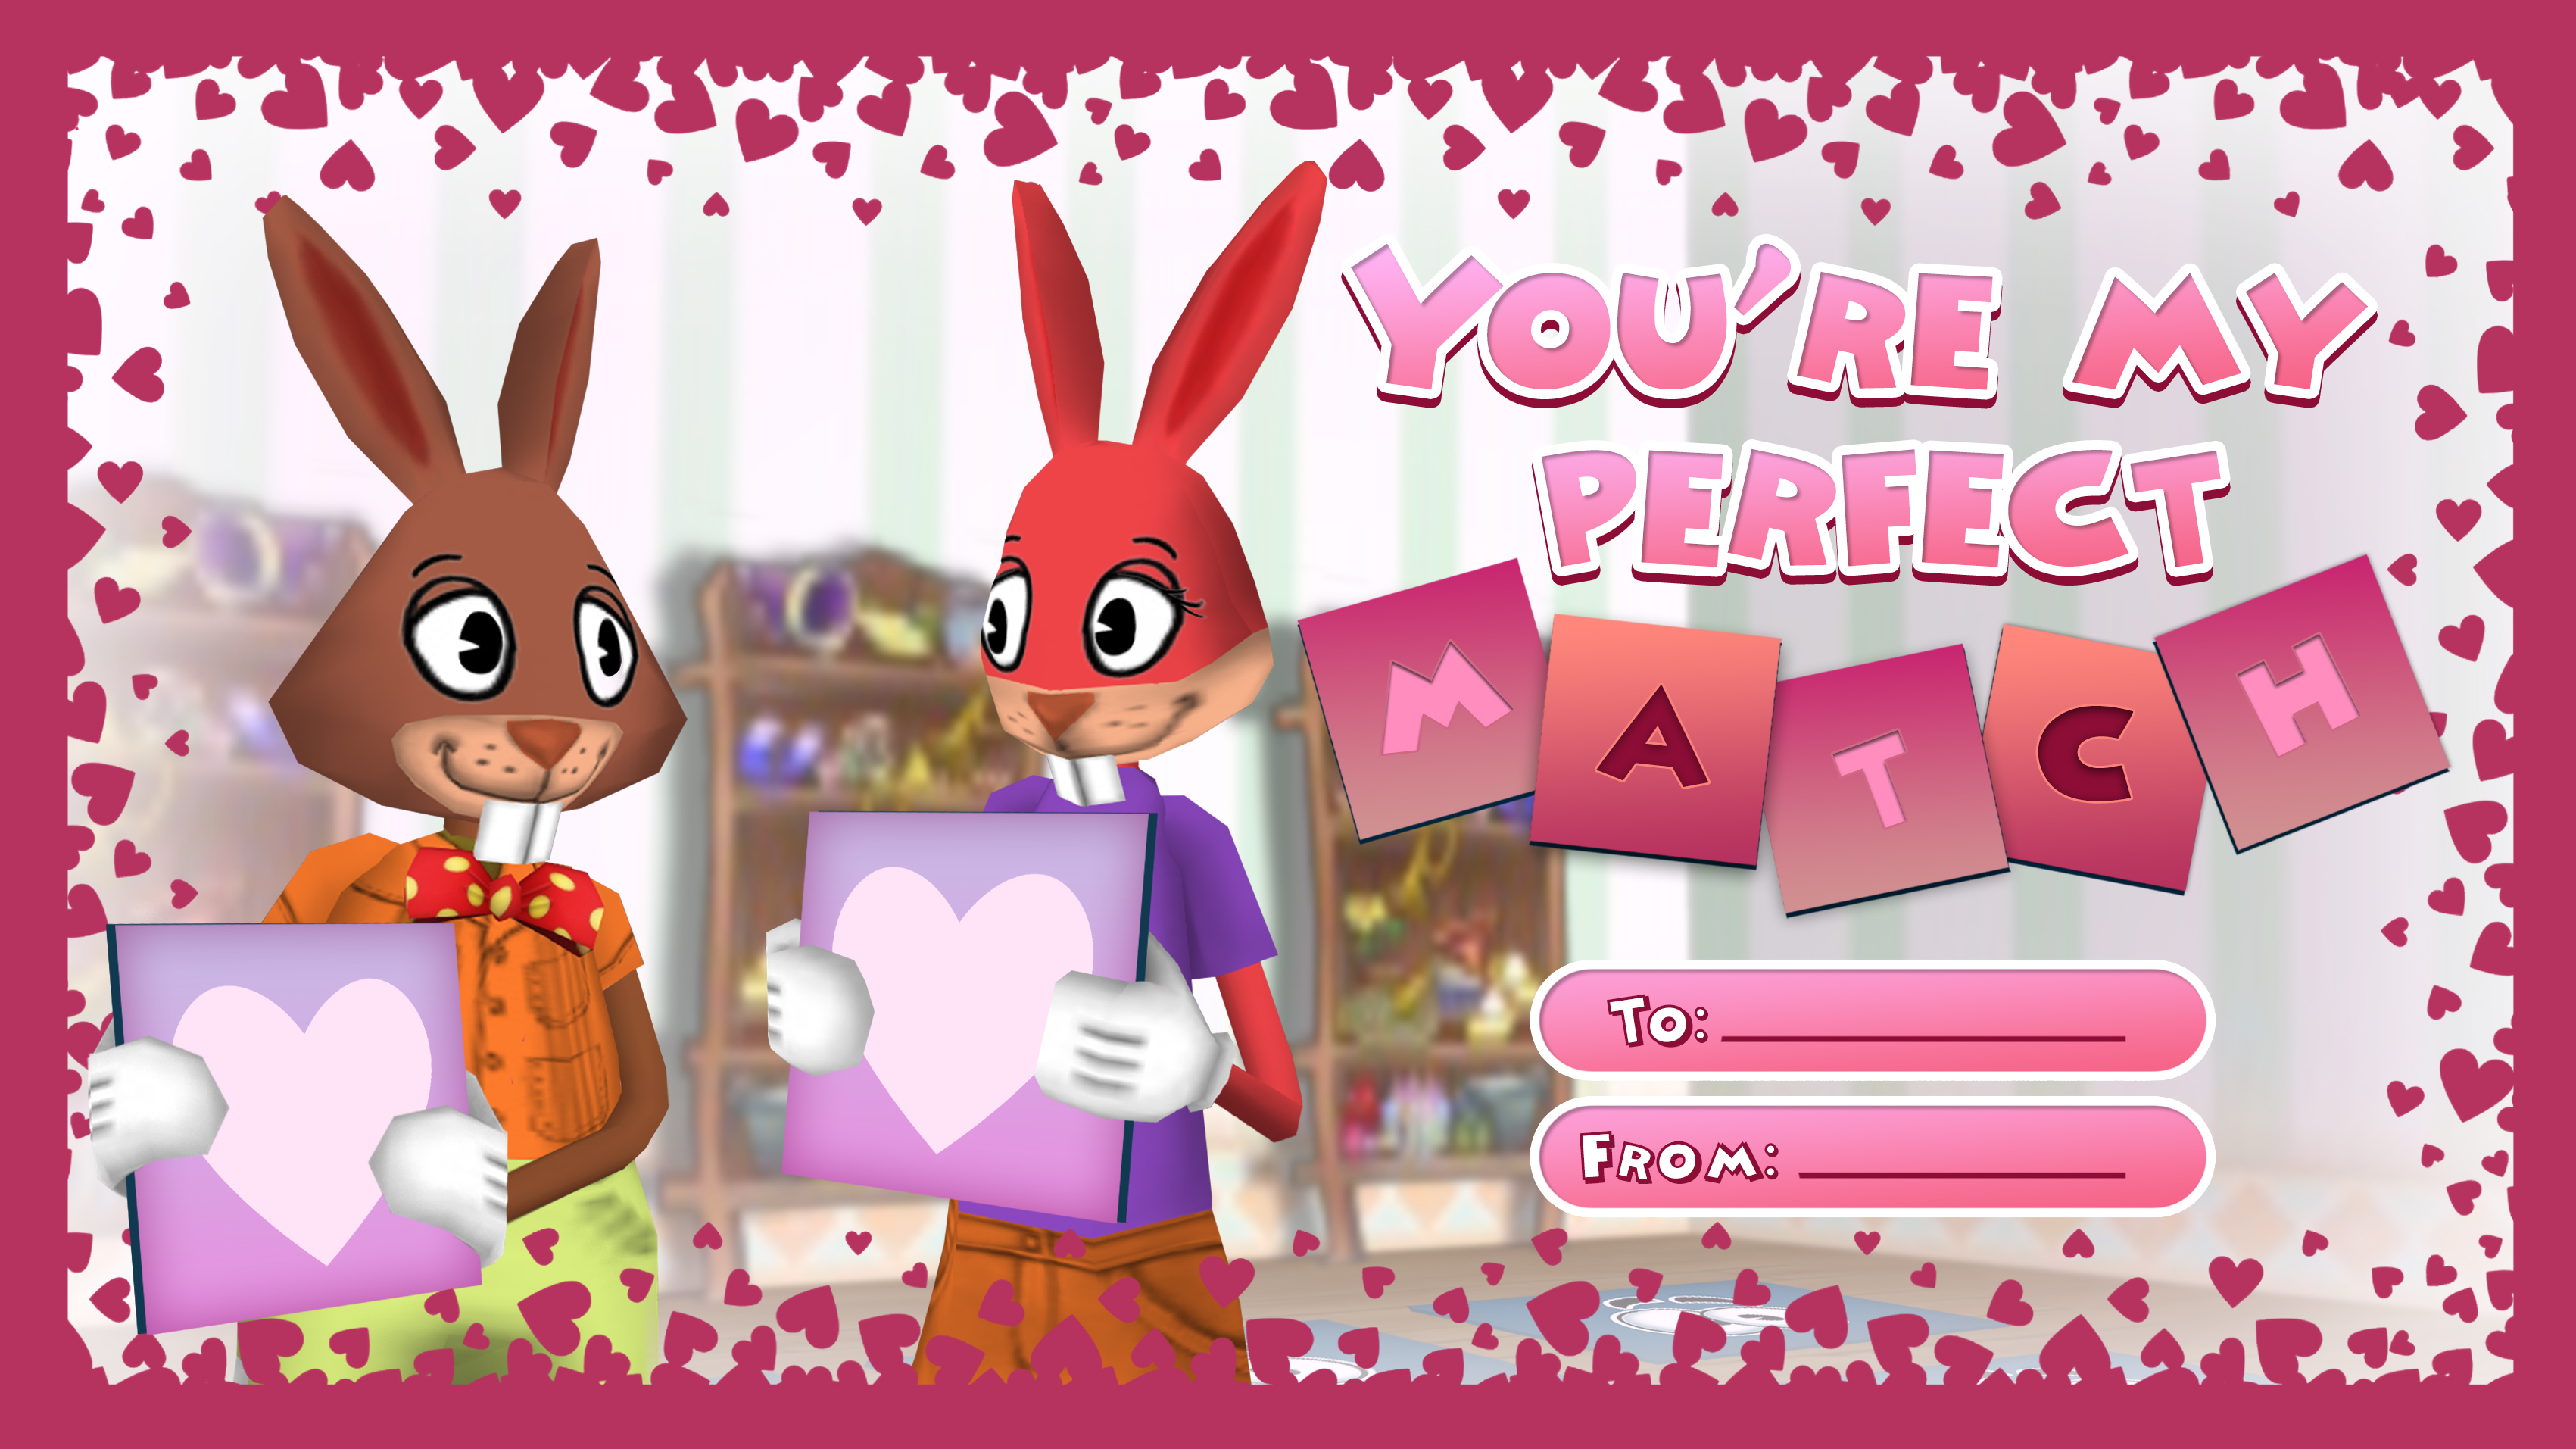 Matching Game ValenToon - You're my perfect match!